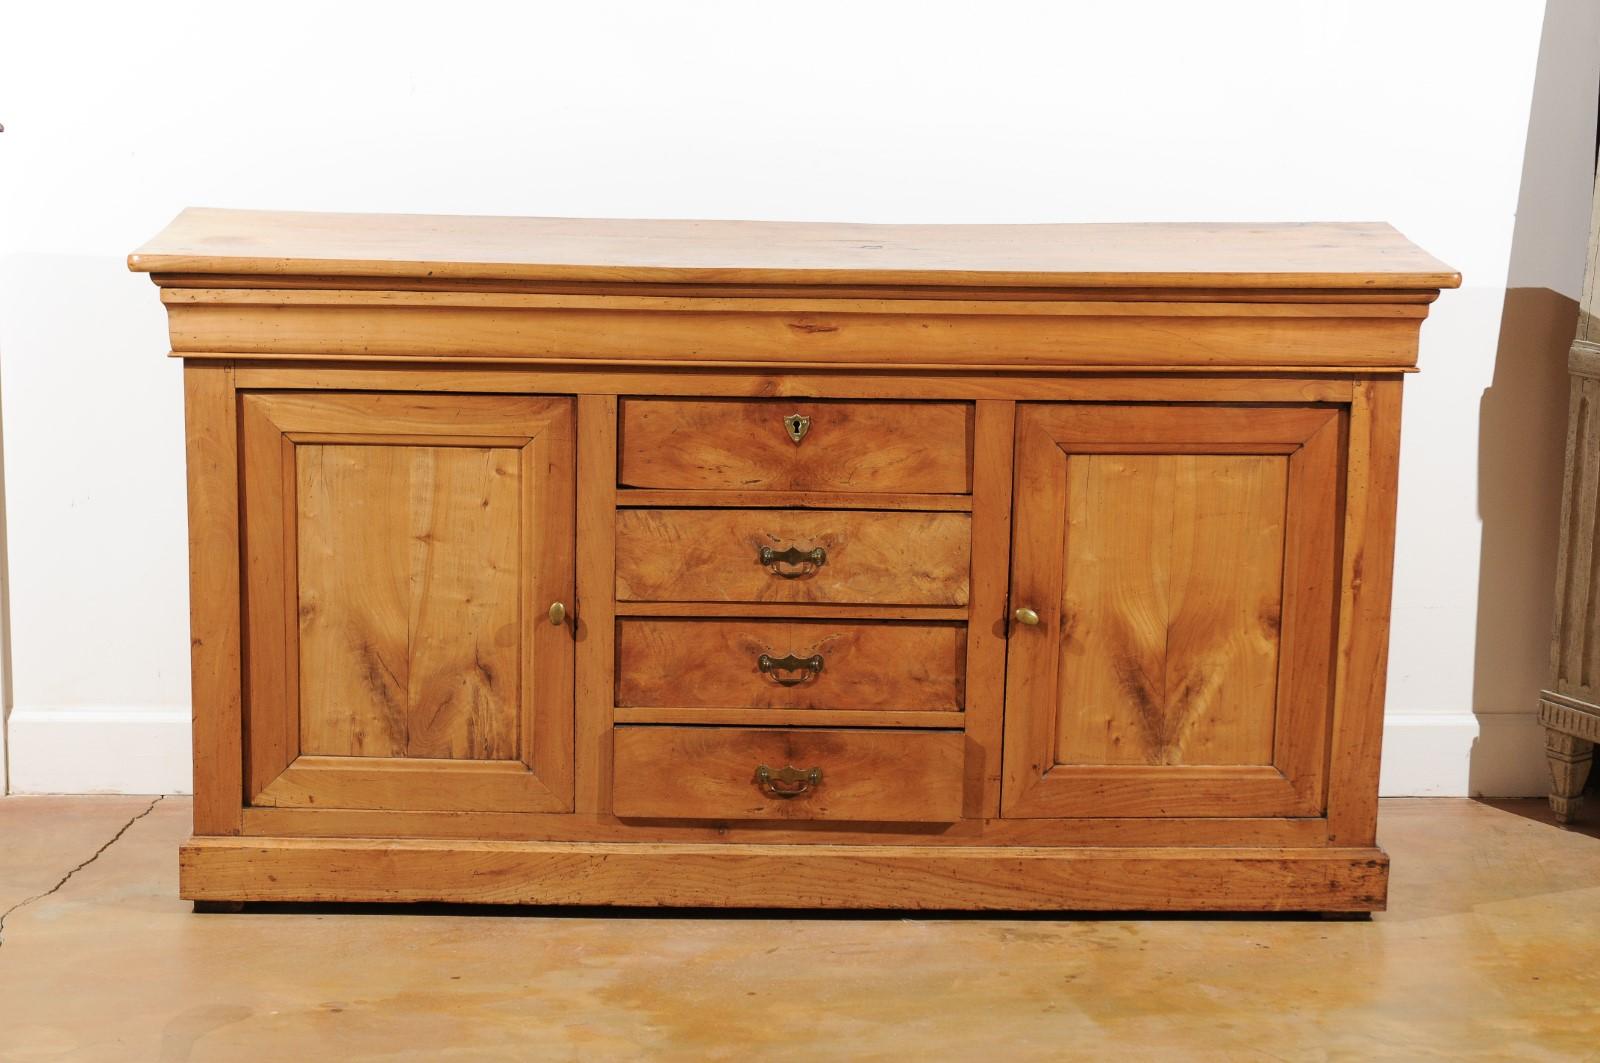 A French Louis-Philippe period walnut enfilade from the mid-19th century, with doors and drawers. Born in France at the end of the Louis-Philippe period, this exquisite walnut sideboard features a rectangular top sitting above a molded apron. The